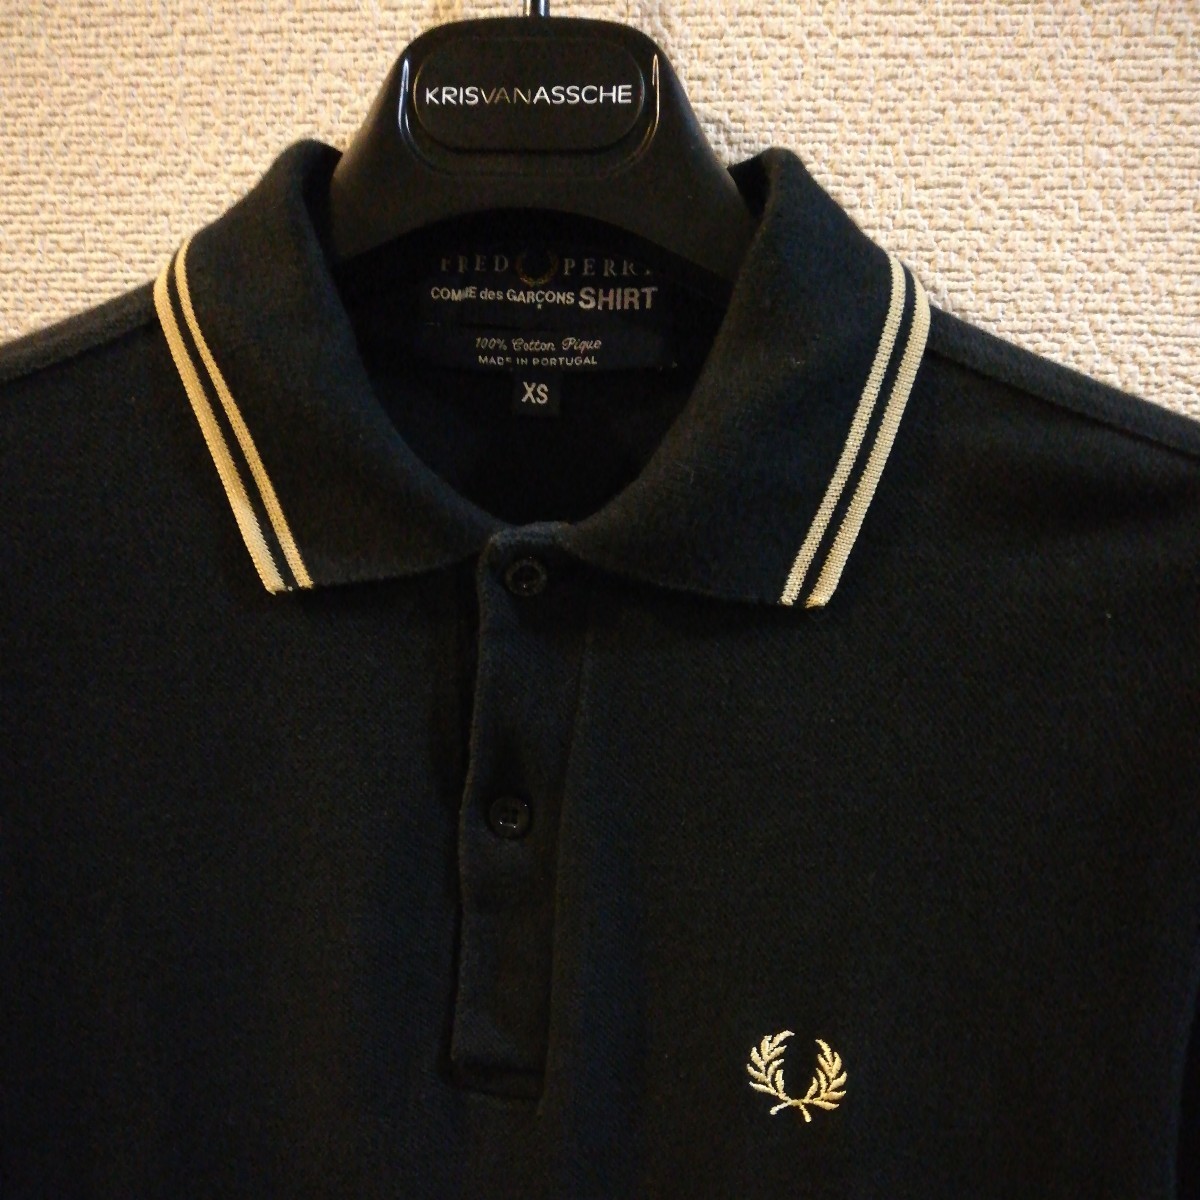 COMME des GARCONS FRED PERRY collaboration polo-shirt XS Portugal made Fred Perry com *te* Garcon shirt jacket 